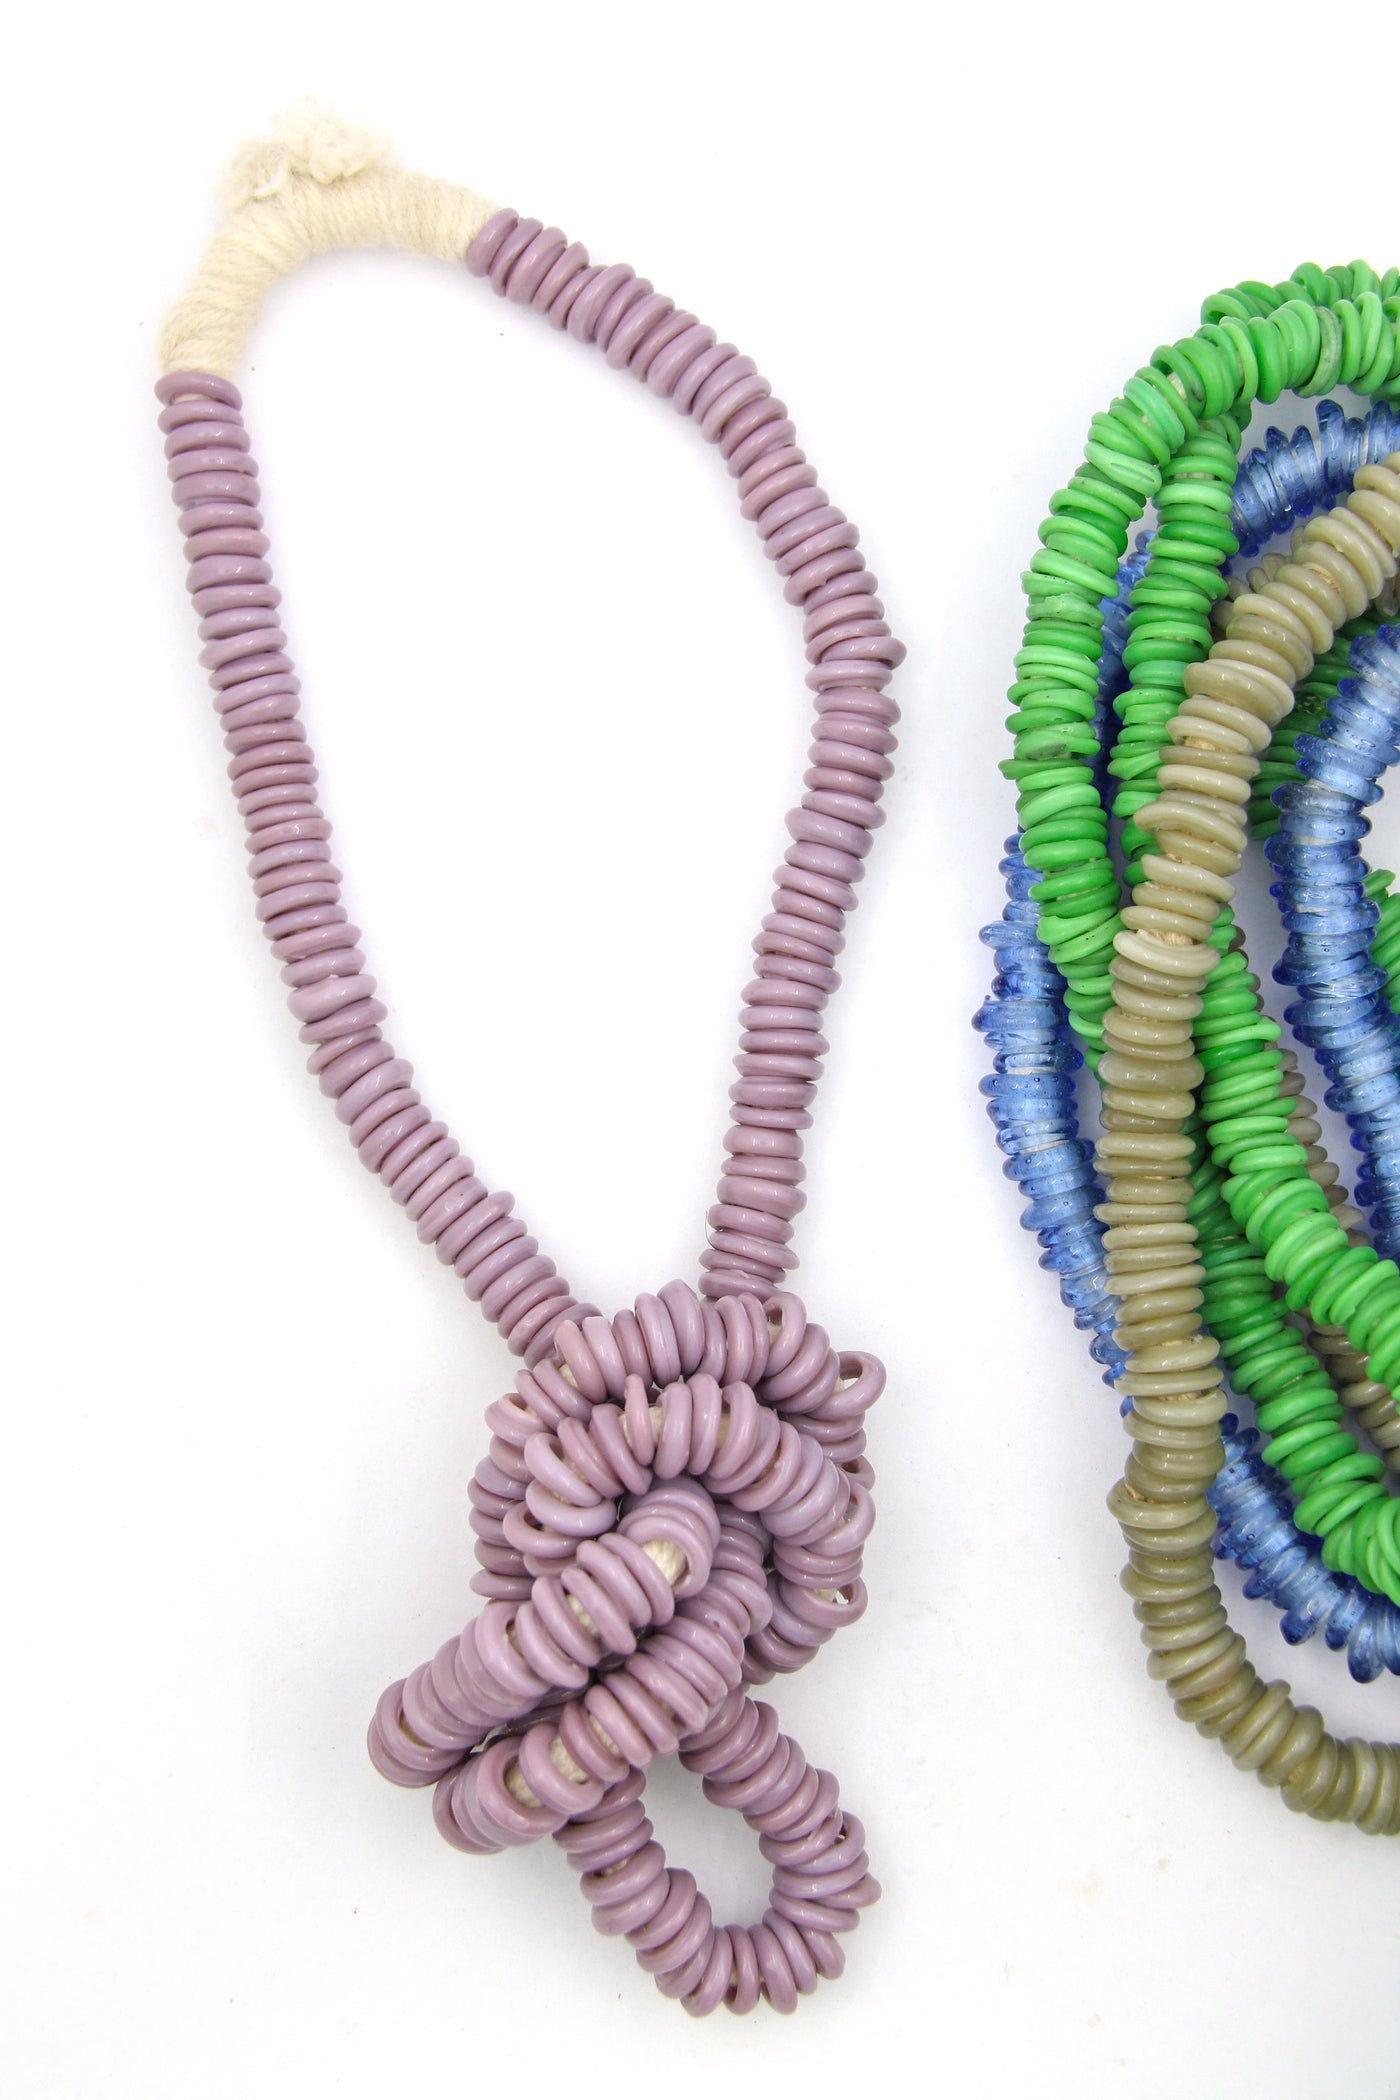 Dutch Donut African Bead Necklace, Long Knotted Bead Strand, Assorted Colors